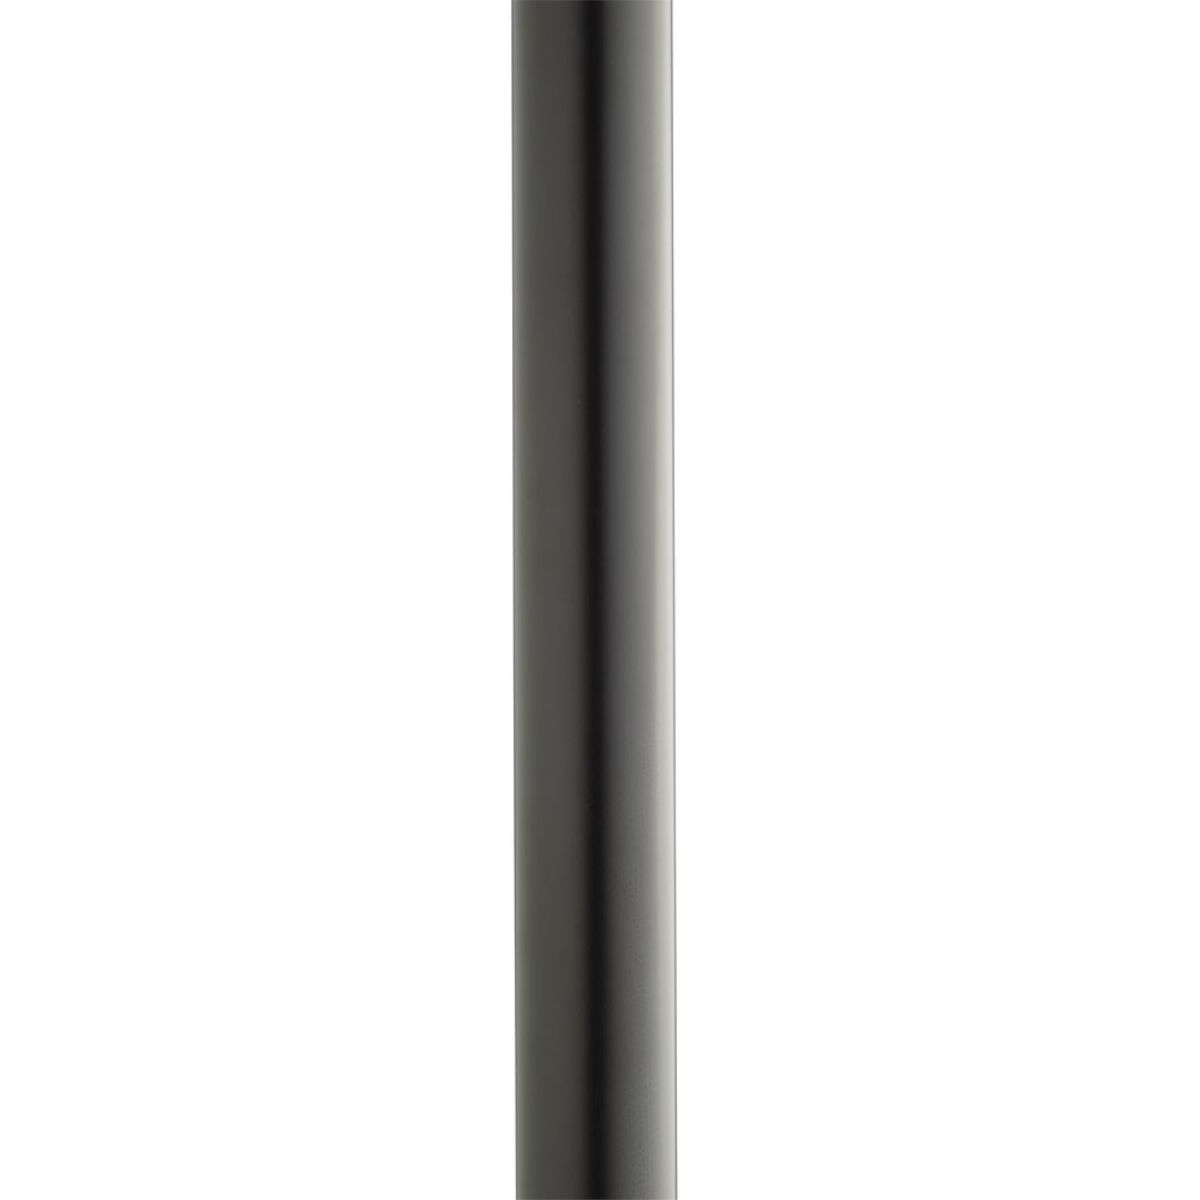 7 Feet Round Aluminum Direct Burial Pole With Ladder Rest 3 In. Shaft Black finish - Bees Lighting